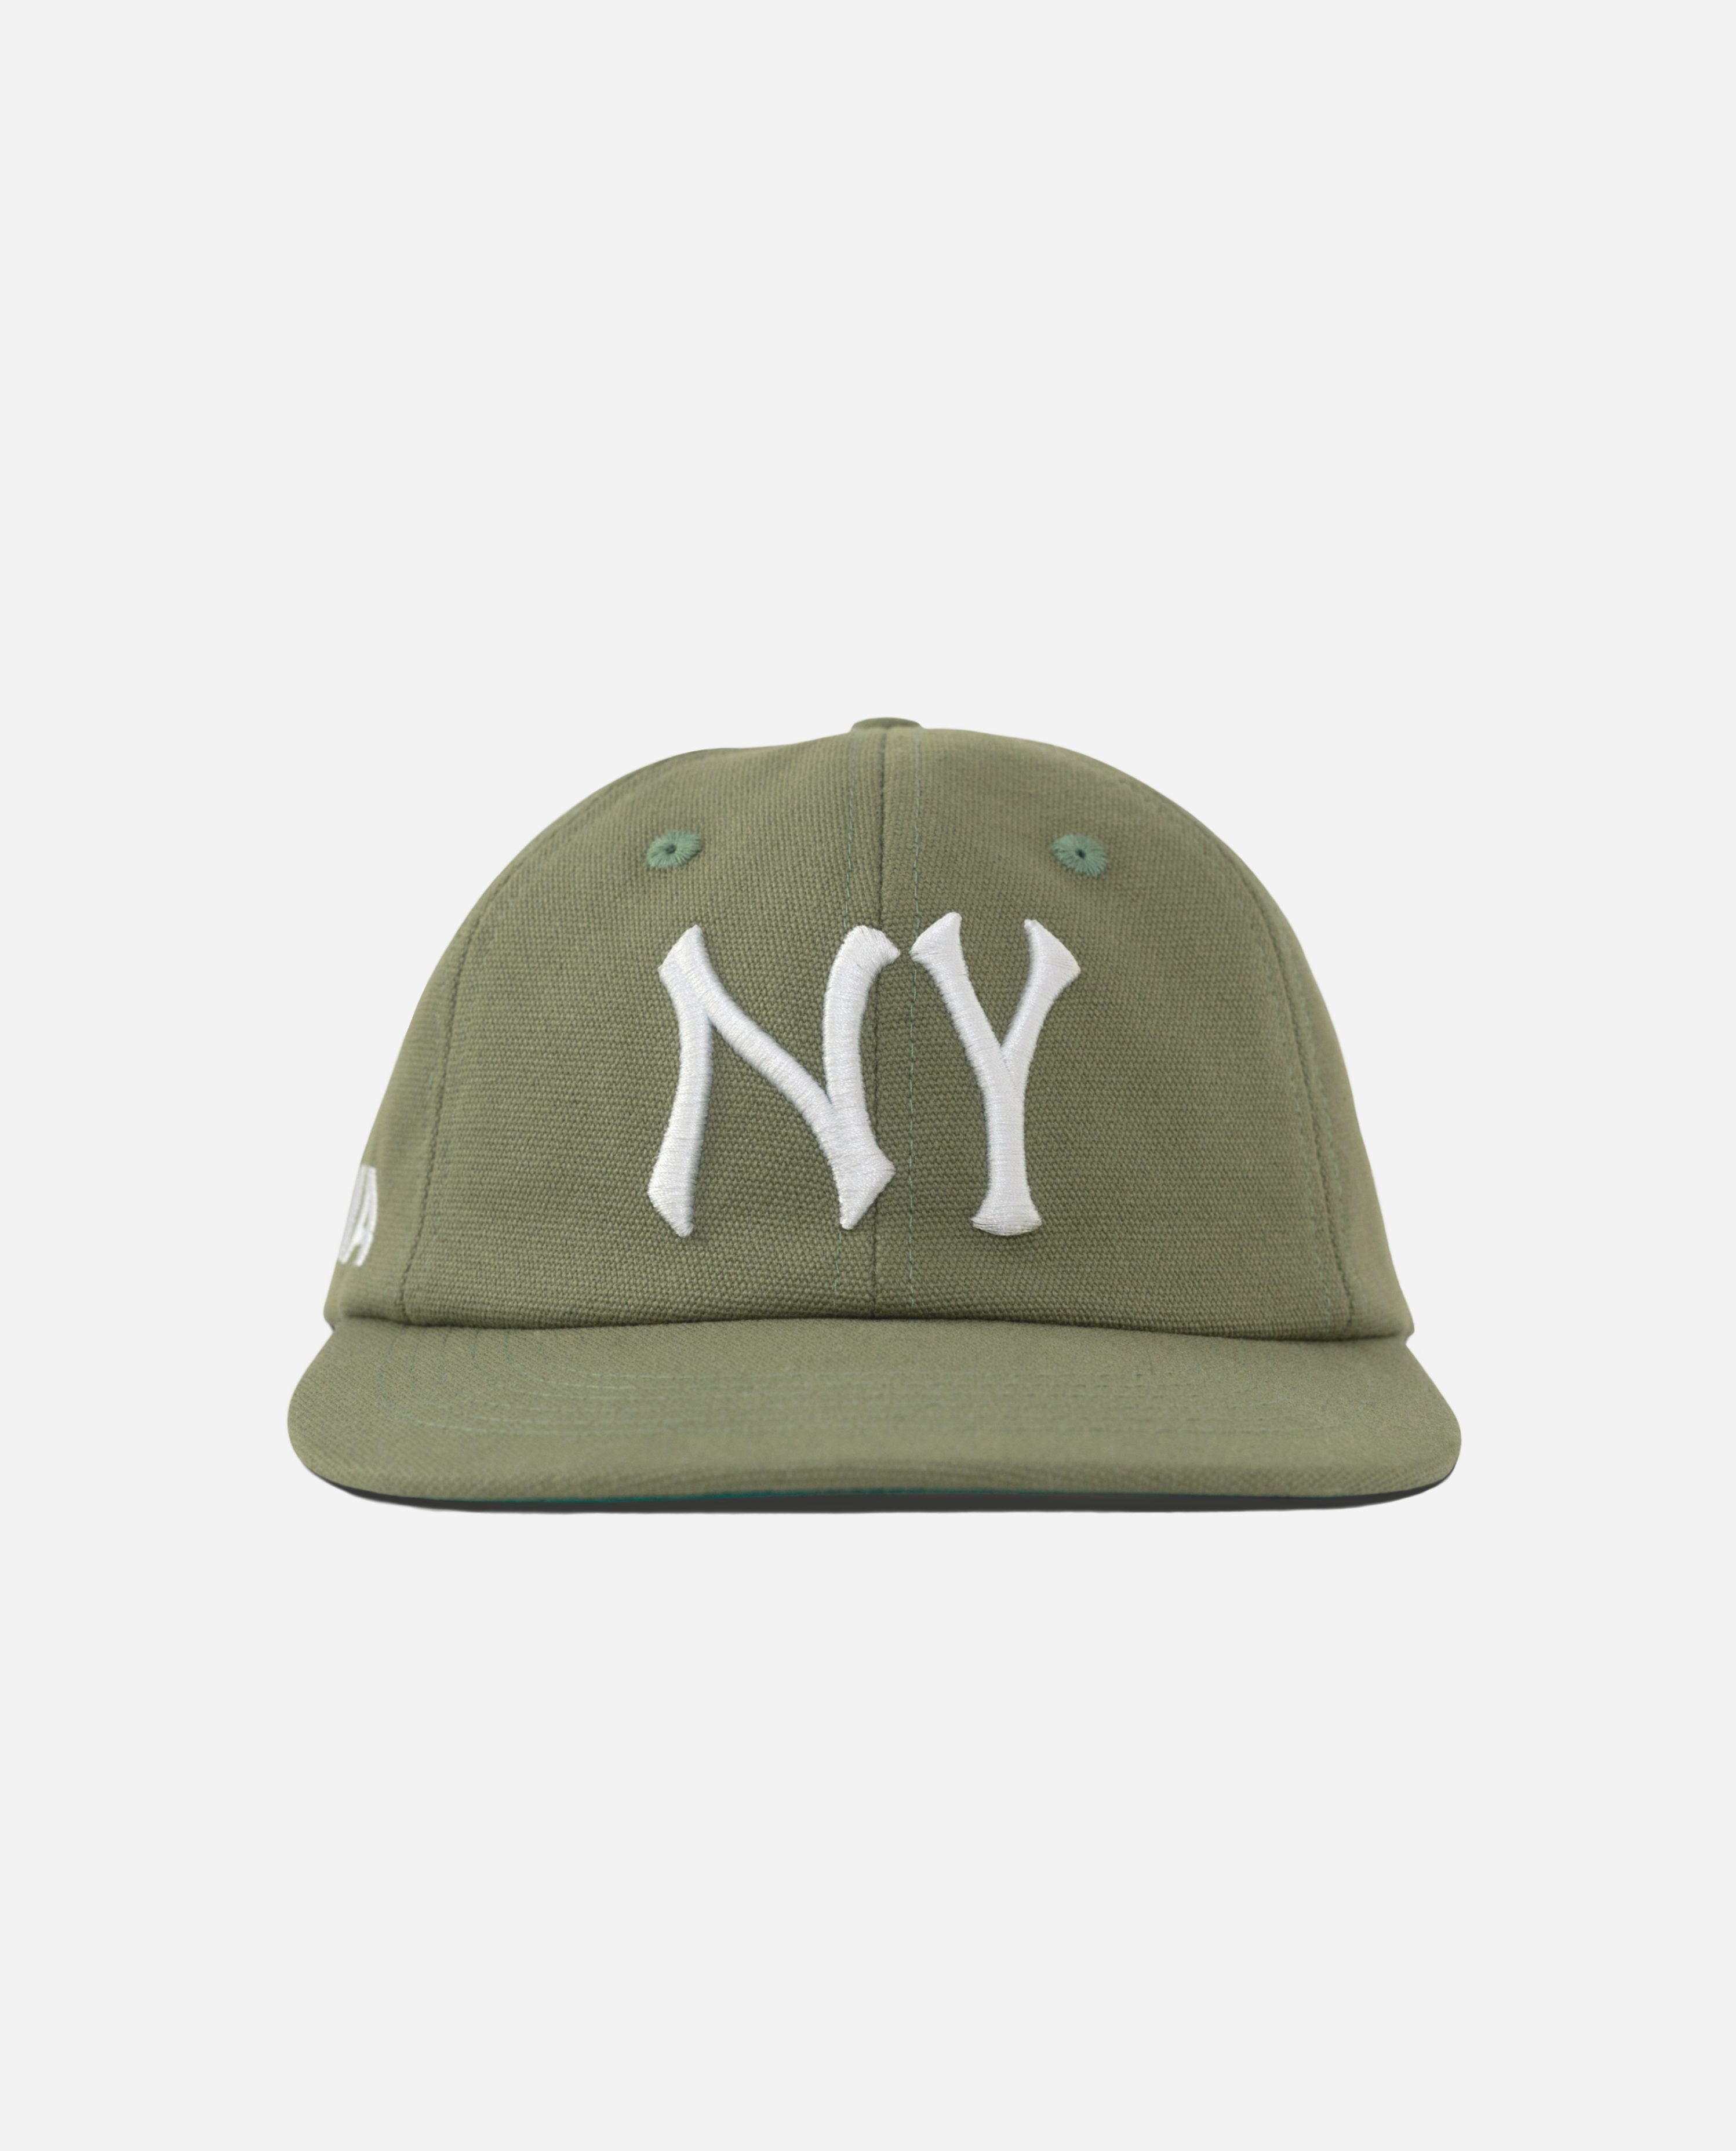 oMA NEW YORK HAT (OLIVE GREEN)